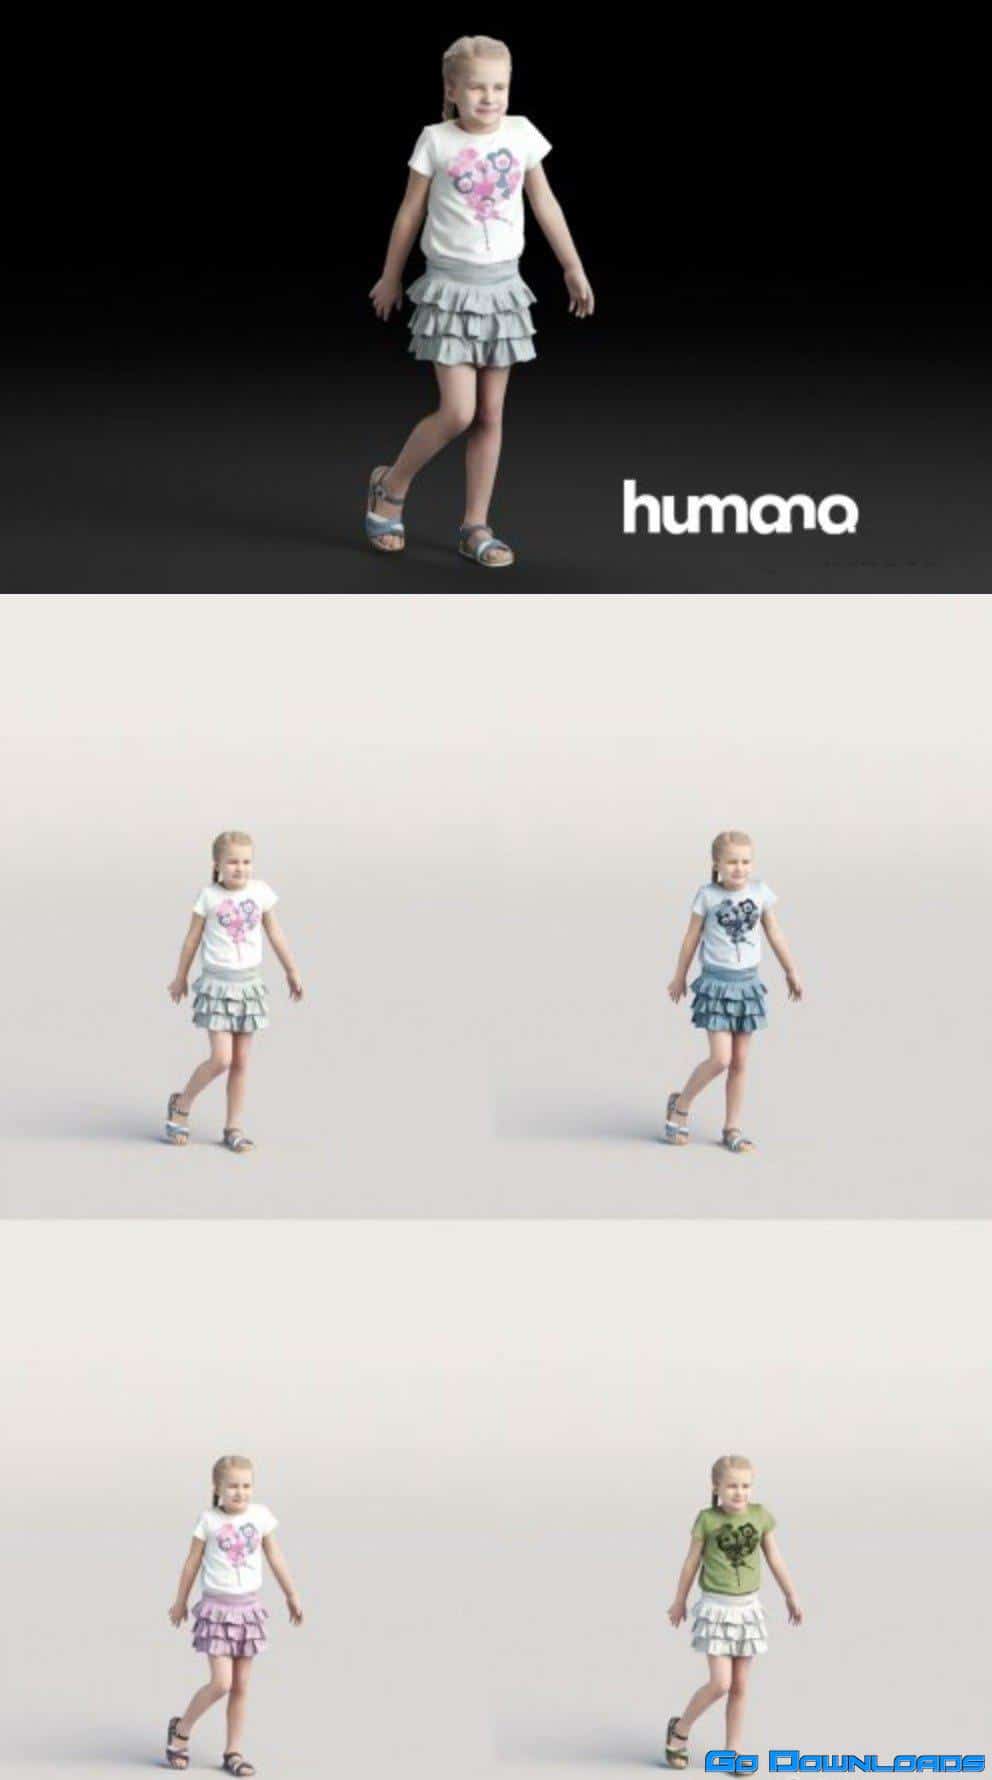 Humano Casual child girl in skirt standing and looking 0207 3D model Free Download